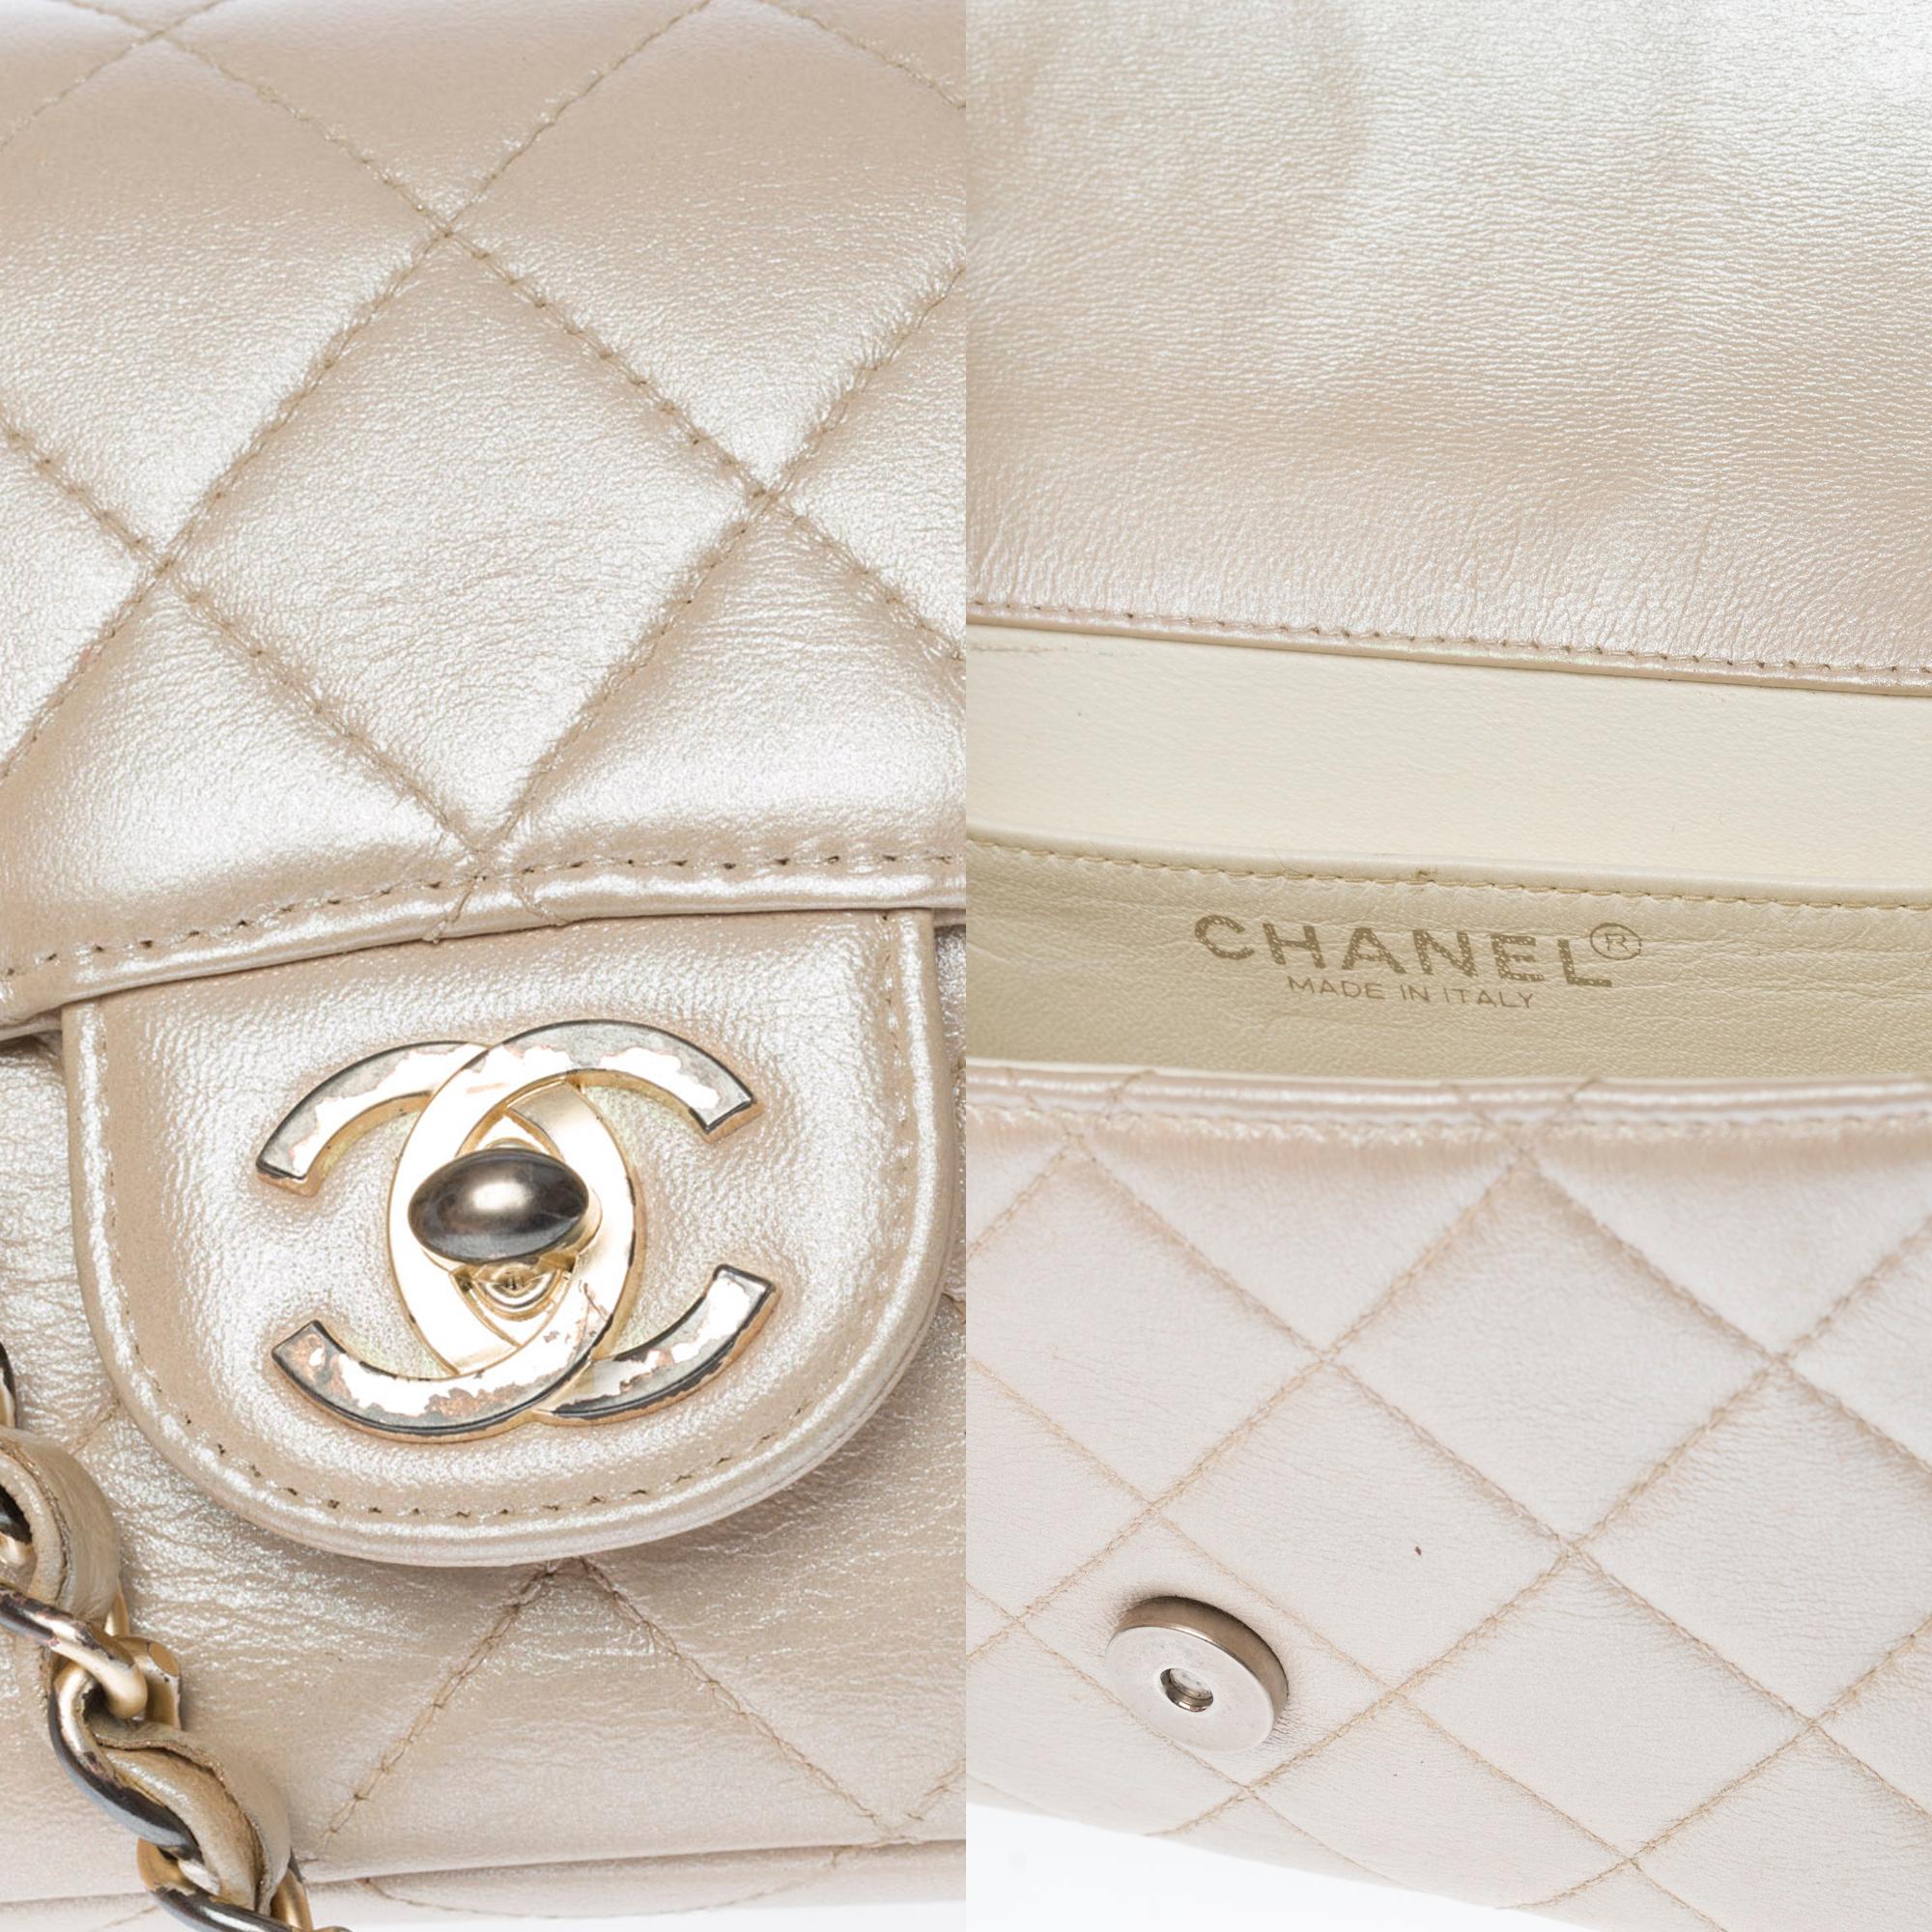 Women's Chanel Mini Timeless flap shoulder bag in metallic mother-of-pearl leather, GHW